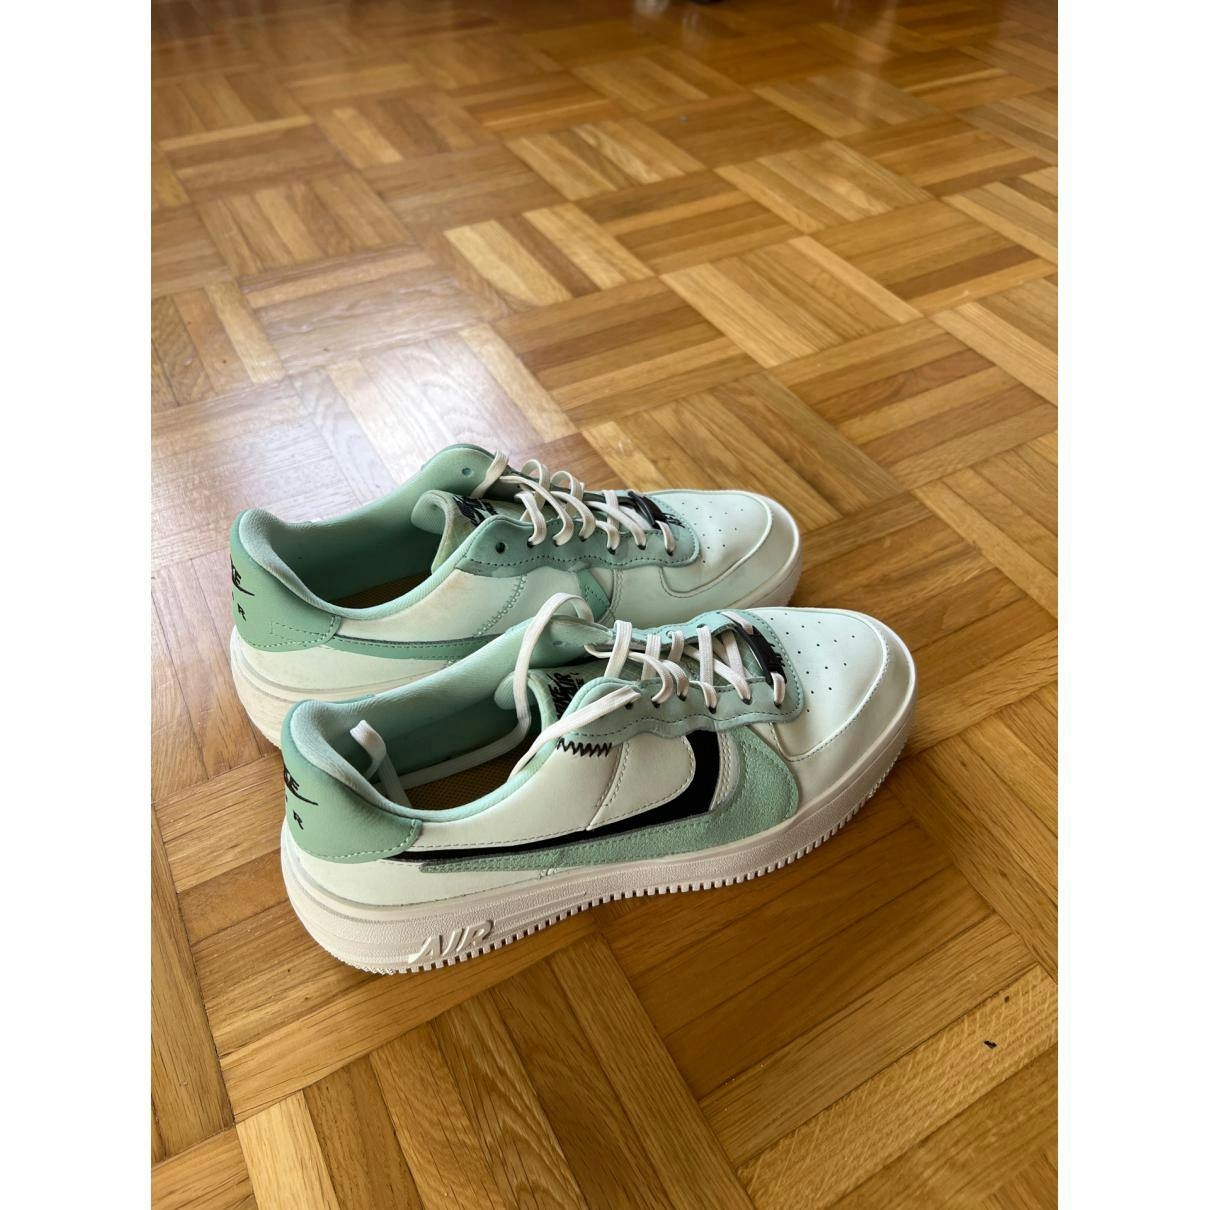 https://images.vestiairecollective.com/cdn-cgi/image/q=75,f=auto,/produit/green-leather-air-force-1-nike-trainers-34609810-8_3.jpg?secret=VC-e9eee96a-a819-4431-ad12-d066be2626ef